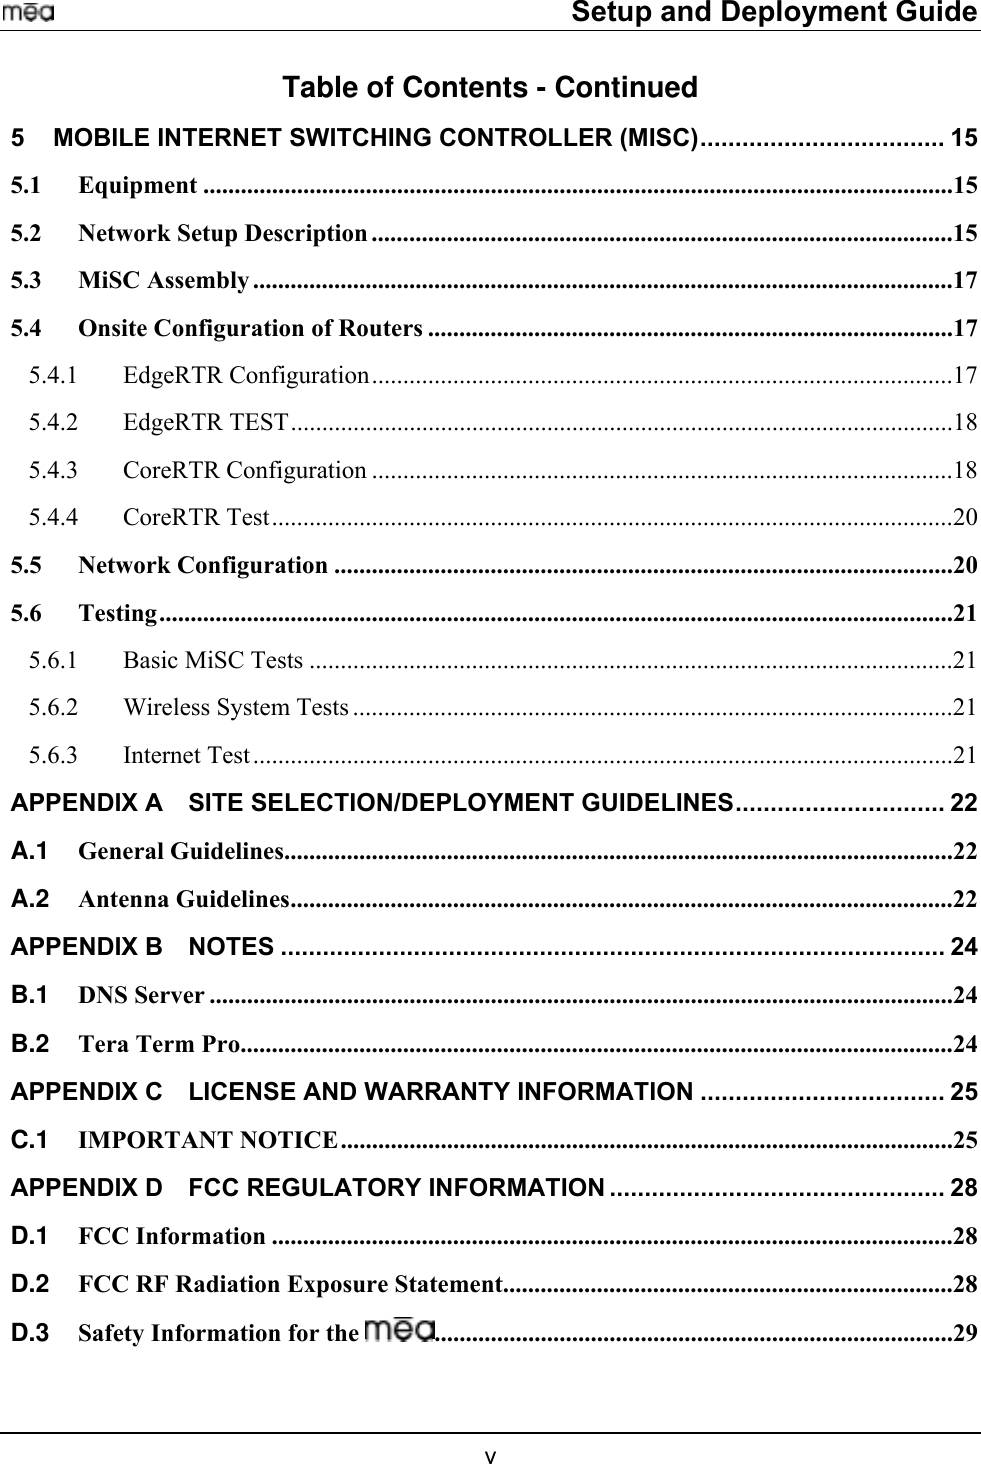     Setup and Deployment Guide Table of Contents - Continued 5 MOBILE INTERNET SWITCHING CONTROLLER (MISC)................................... 15 5.1 Equipment ........................................................................................................................15 5.2 Network Setup Description .............................................................................................15 5.3 MiSC Assembly ................................................................................................................17 5.4 Onsite Configuration of Routers ....................................................................................17 5.4.1 EdgeRTR Configuration.............................................................................................17 5.4.2 EdgeRTR TEST..........................................................................................................18 5.4.3 CoreRTR Configuration .............................................................................................18 5.4.4 CoreRTR Test.............................................................................................................20 5.5 Network Configuration ...................................................................................................20 5.6 Testing...............................................................................................................................21 5.6.1 Basic MiSC Tests .......................................................................................................21 5.6.2  Wireless System Tests ................................................................................................21 5.6.3 Internet Test ................................................................................................................21 APPENDIX A SITE SELECTION/DEPLOYMENT GUIDELINES.............................. 22 A.1 General Guidelines...........................................................................................................22 A.2 Antenna Guidelines..........................................................................................................22 APPENDIX B NOTES ............................................................................................... 24 B.1 DNS Server .......................................................................................................................24 B.2 Tera Term Pro..................................................................................................................24 APPENDIX C LICENSE AND WARRANTY INFORMATION ................................... 25 C.1 IMPORTANT NOTICE..................................................................................................25 APPENDIX D FCC REGULATORY INFORMATION ................................................ 28 D.1 FCC Information .............................................................................................................28 D.2 FCC RF Radiation Exposure Statement........................................................................28 D.3 Safety Information for the  ...................................................................................29  v 